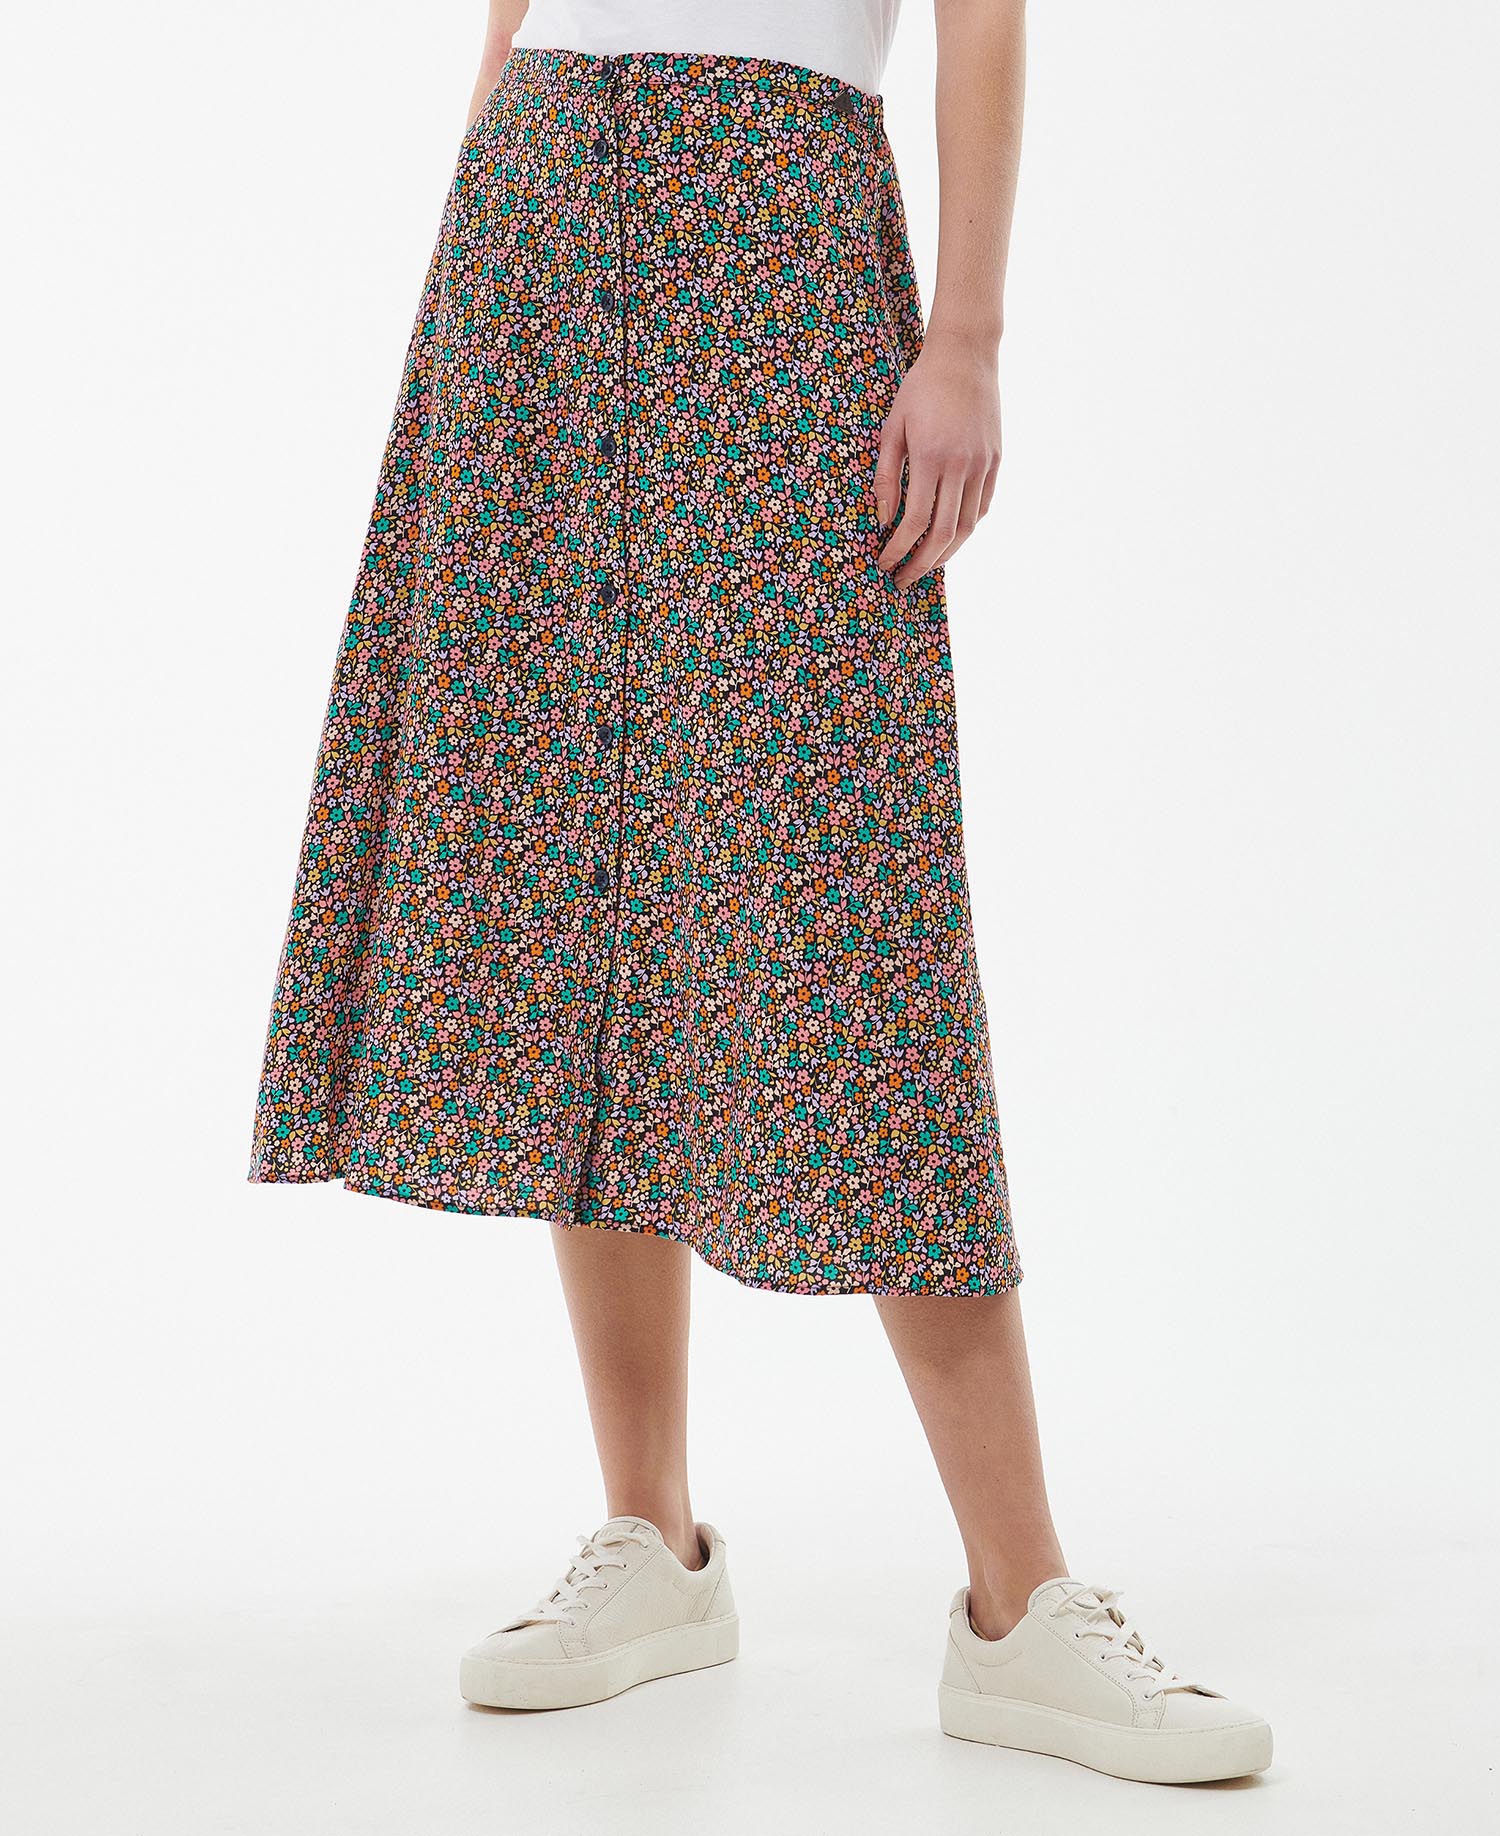 Barbour Anglesey Skirt | Barbour